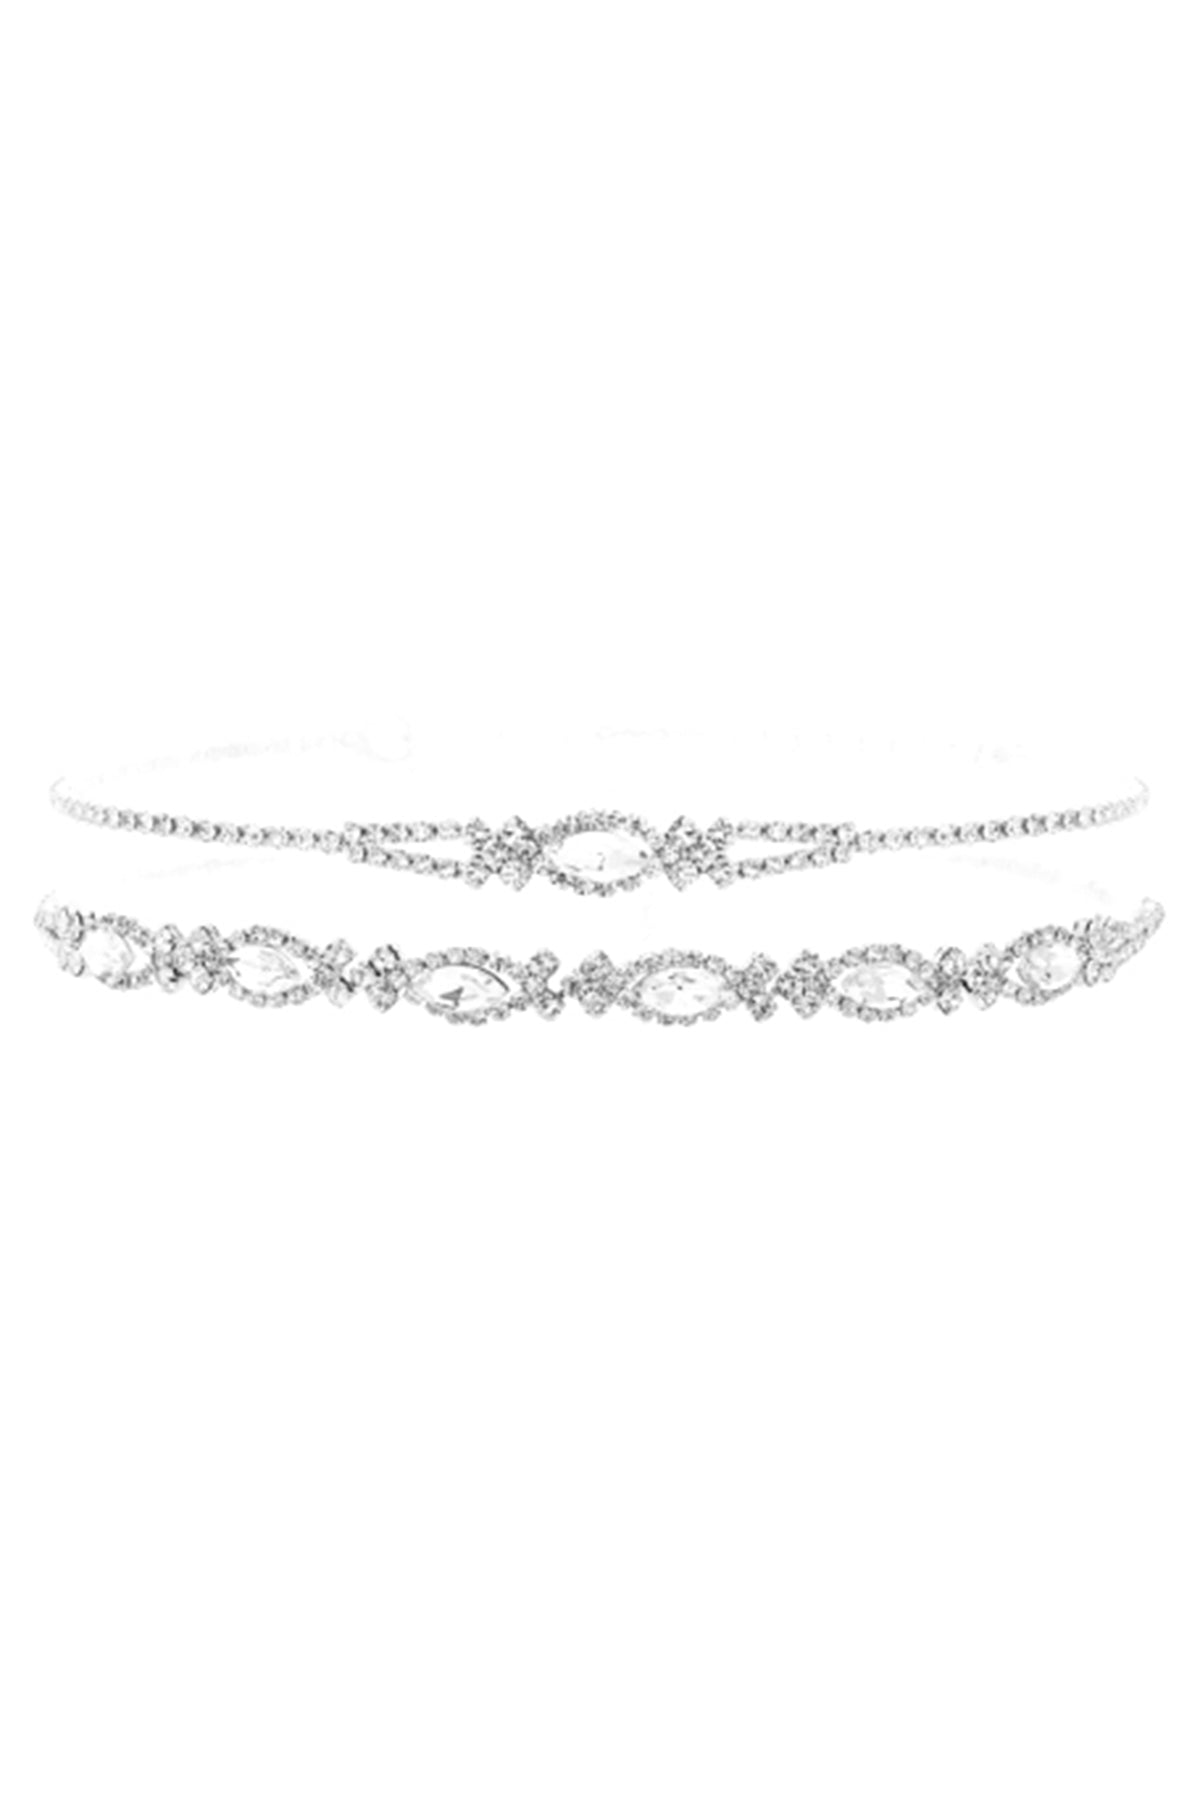 RHINESTONE OVAL SIDEWAYS LAYERED COLLAR NECKLACE (NOW $ 2.00 ONLY!)